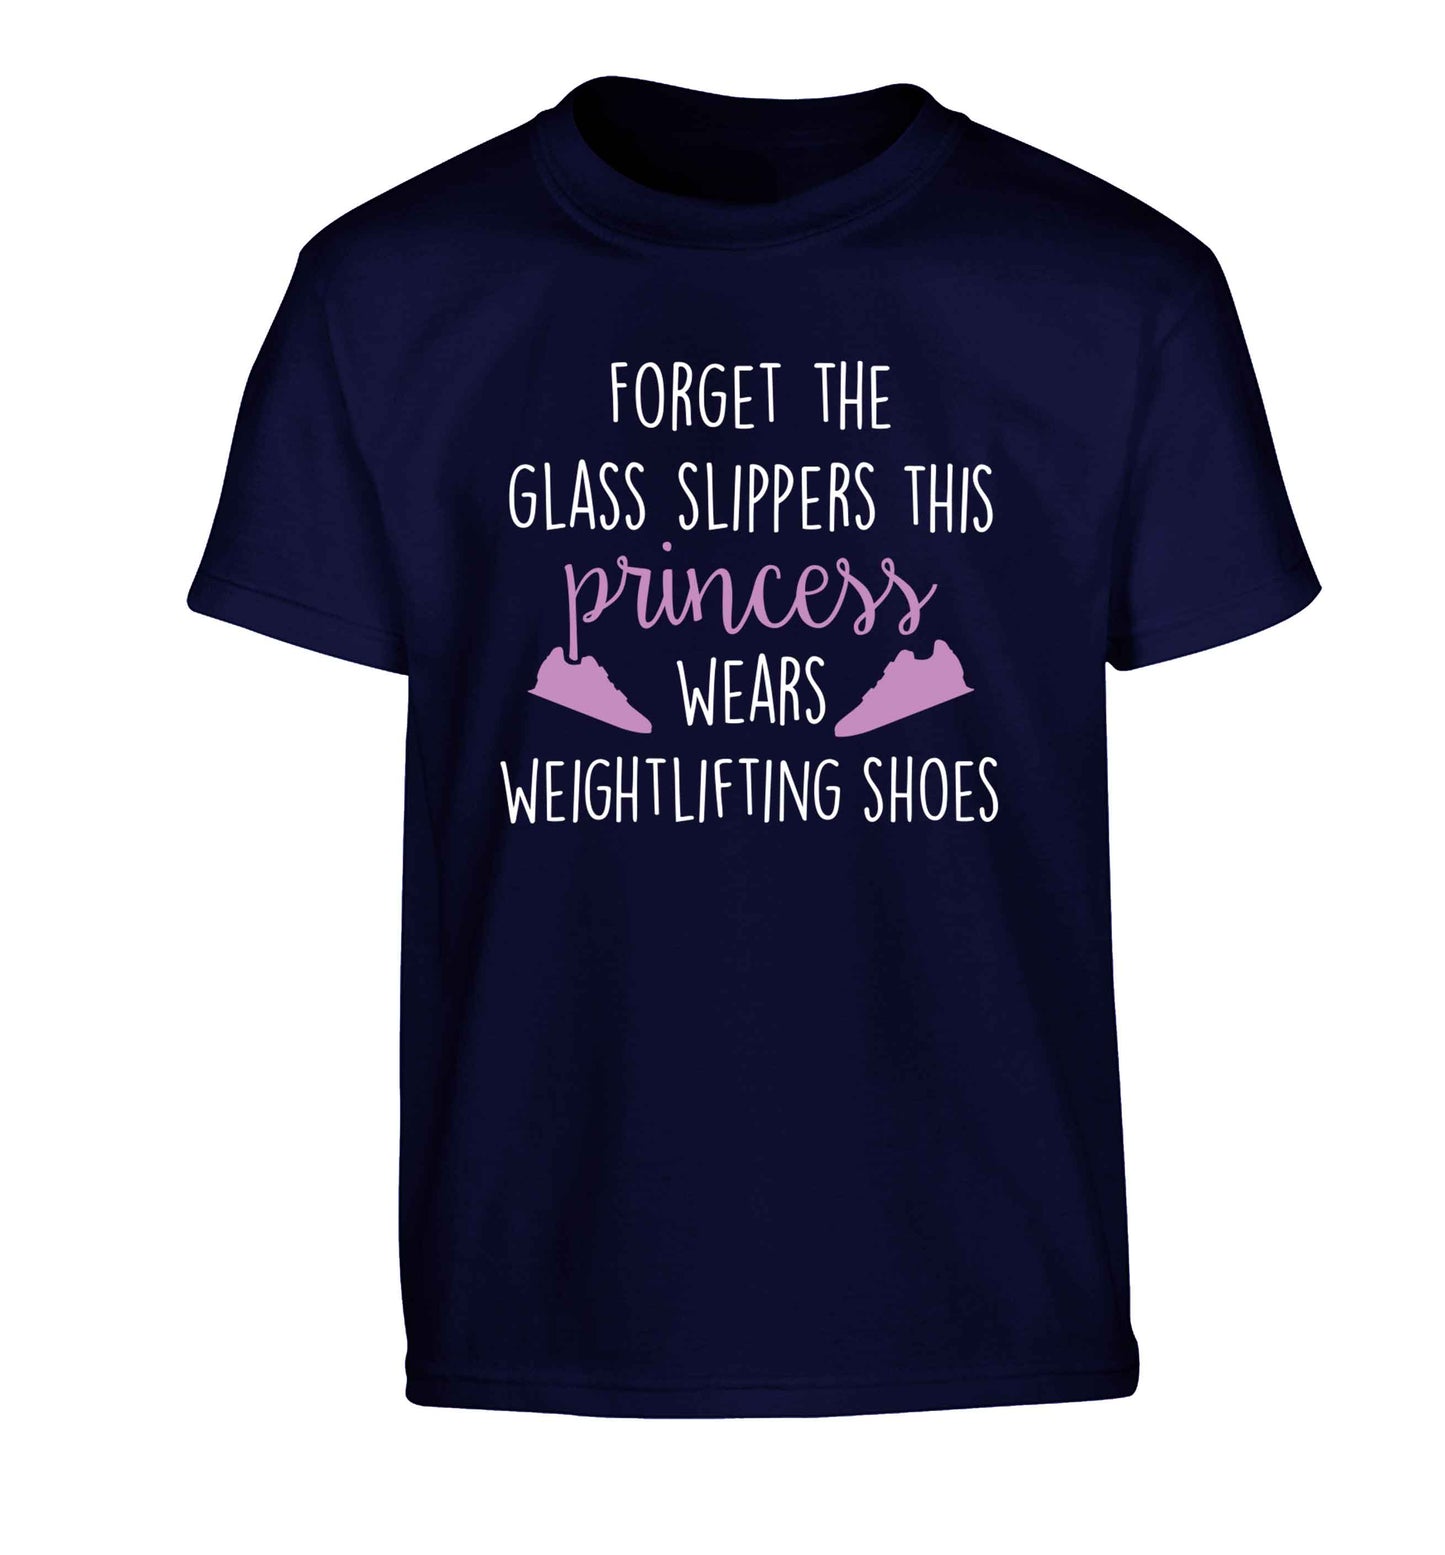 Forget the glass slippers this princess wears weightlifting shoes Children's navy Tshirt 12-13 Years